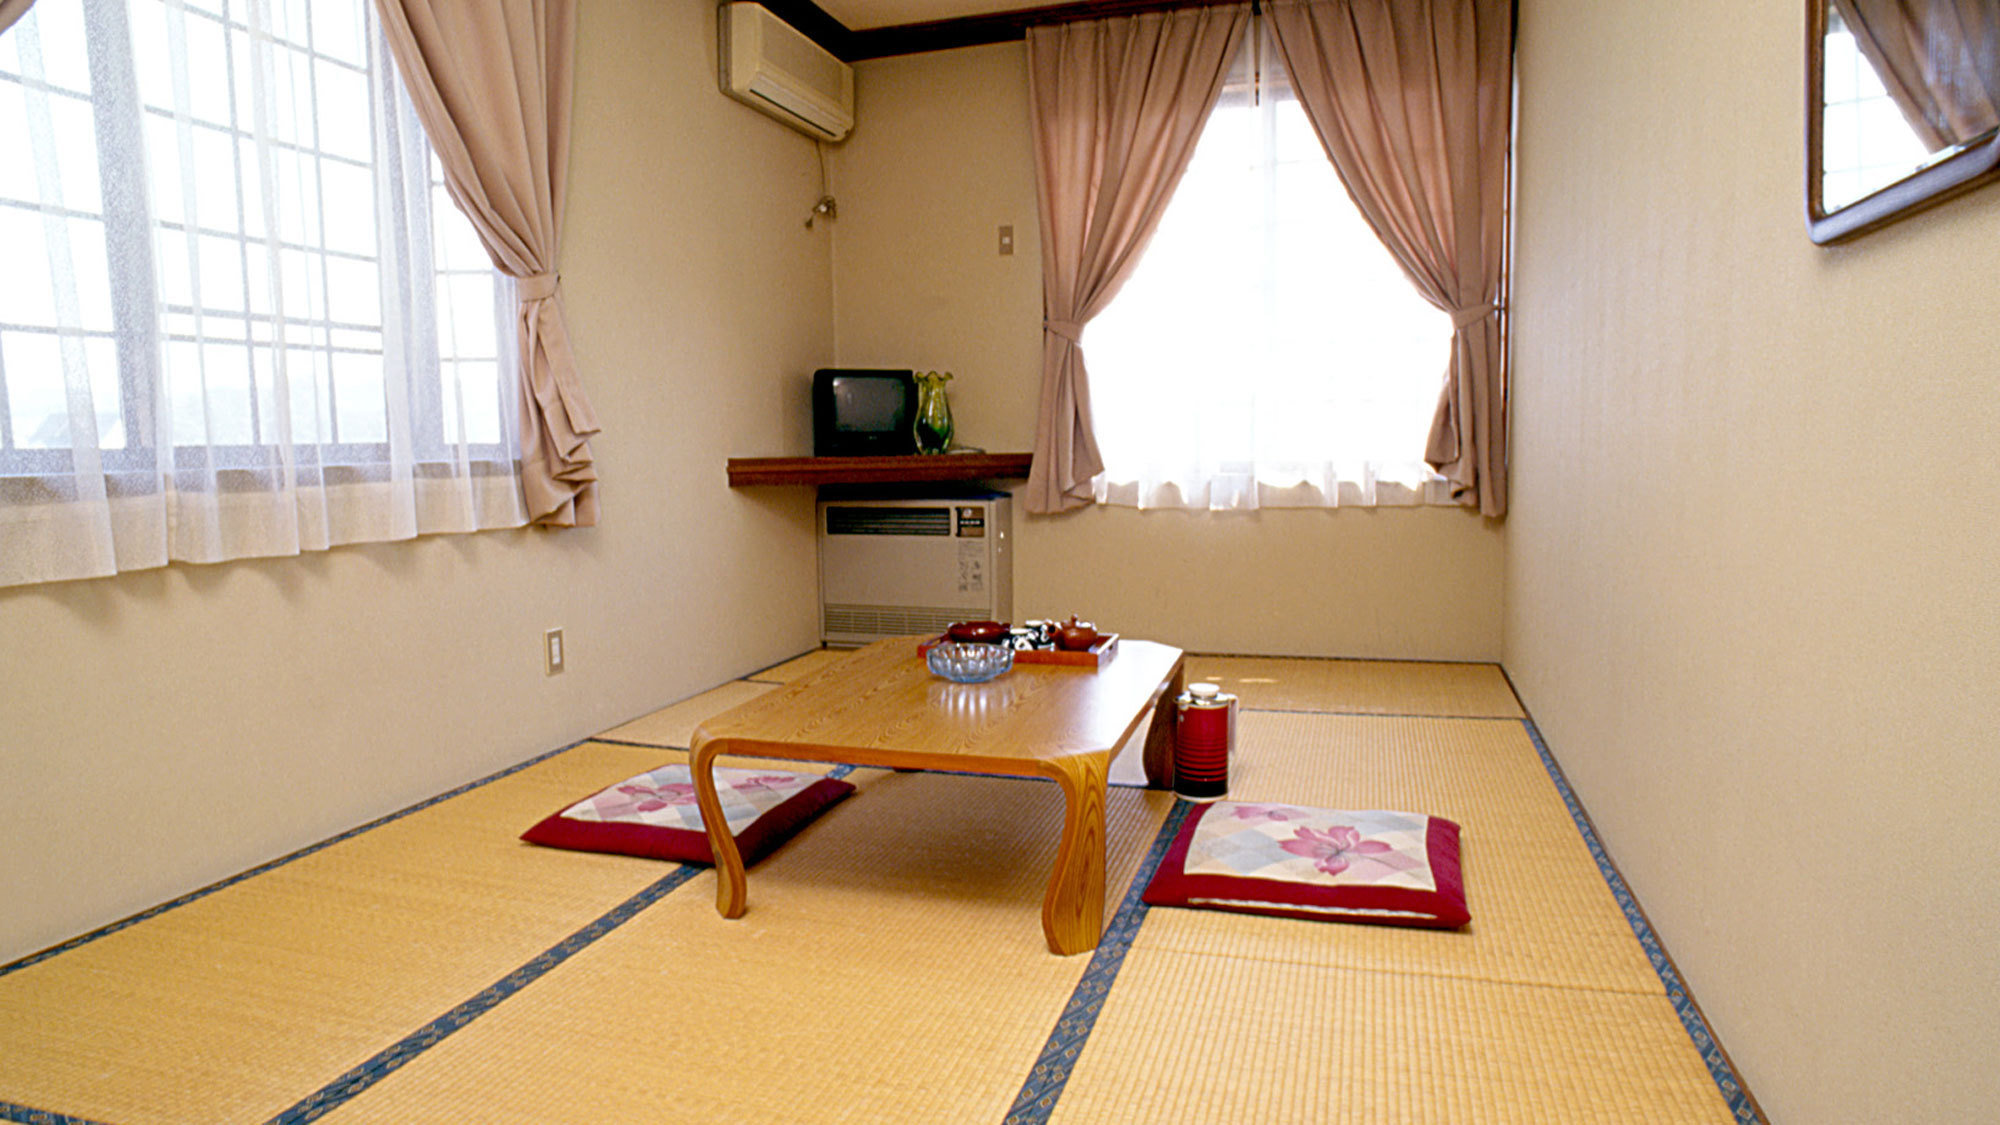 Village Hill Jubankan Village Hill Jubankan is conveniently located in the popular Iiyama area. Offering a variety of facilities and services, the property provides all you need for a good nights sleep. Service-minded sta